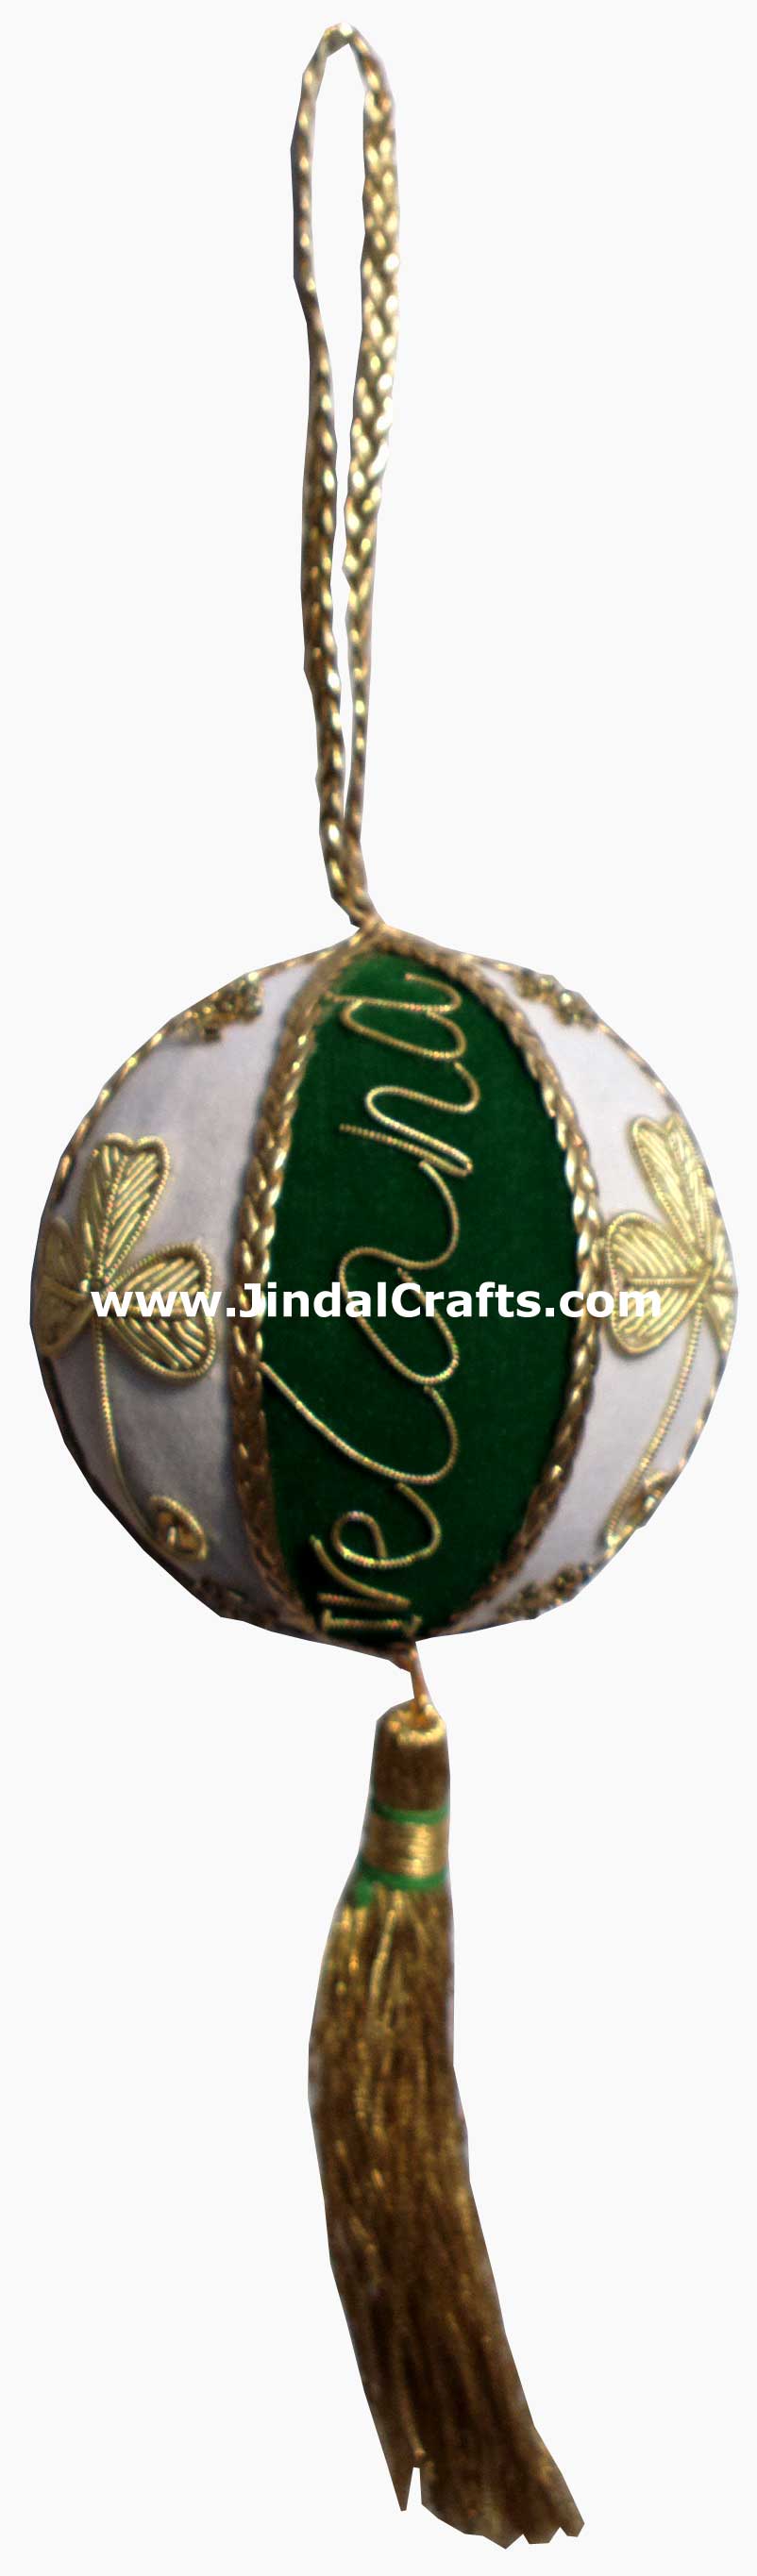 Irish Themed Hand Made Embroidered Christmas Ornaments Xmas Holiday Decorations